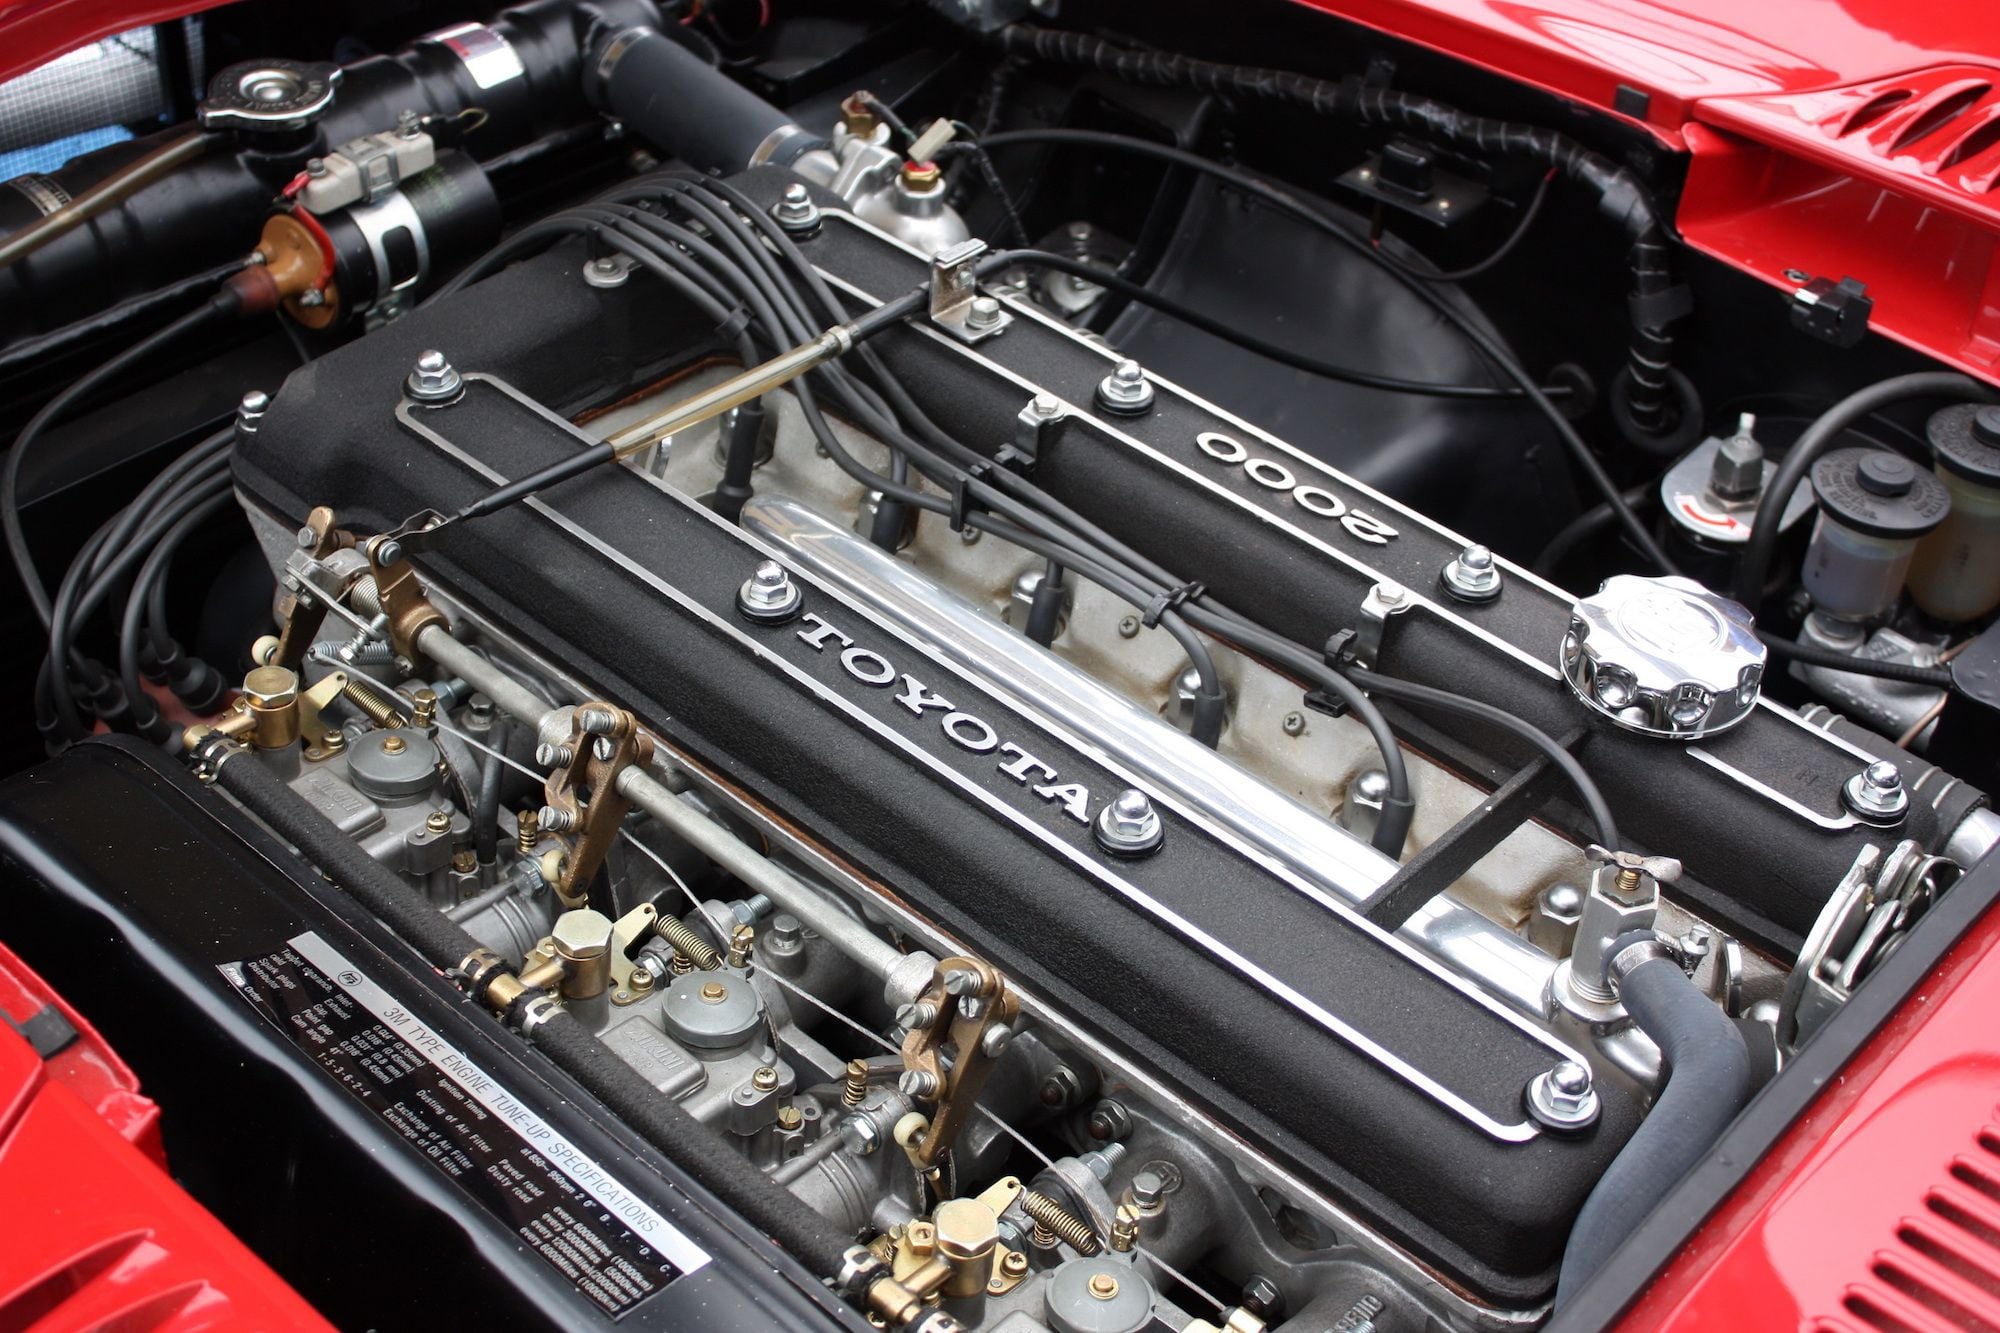 This 2000GT's engine gives it an impressive 150-horsepower capability.